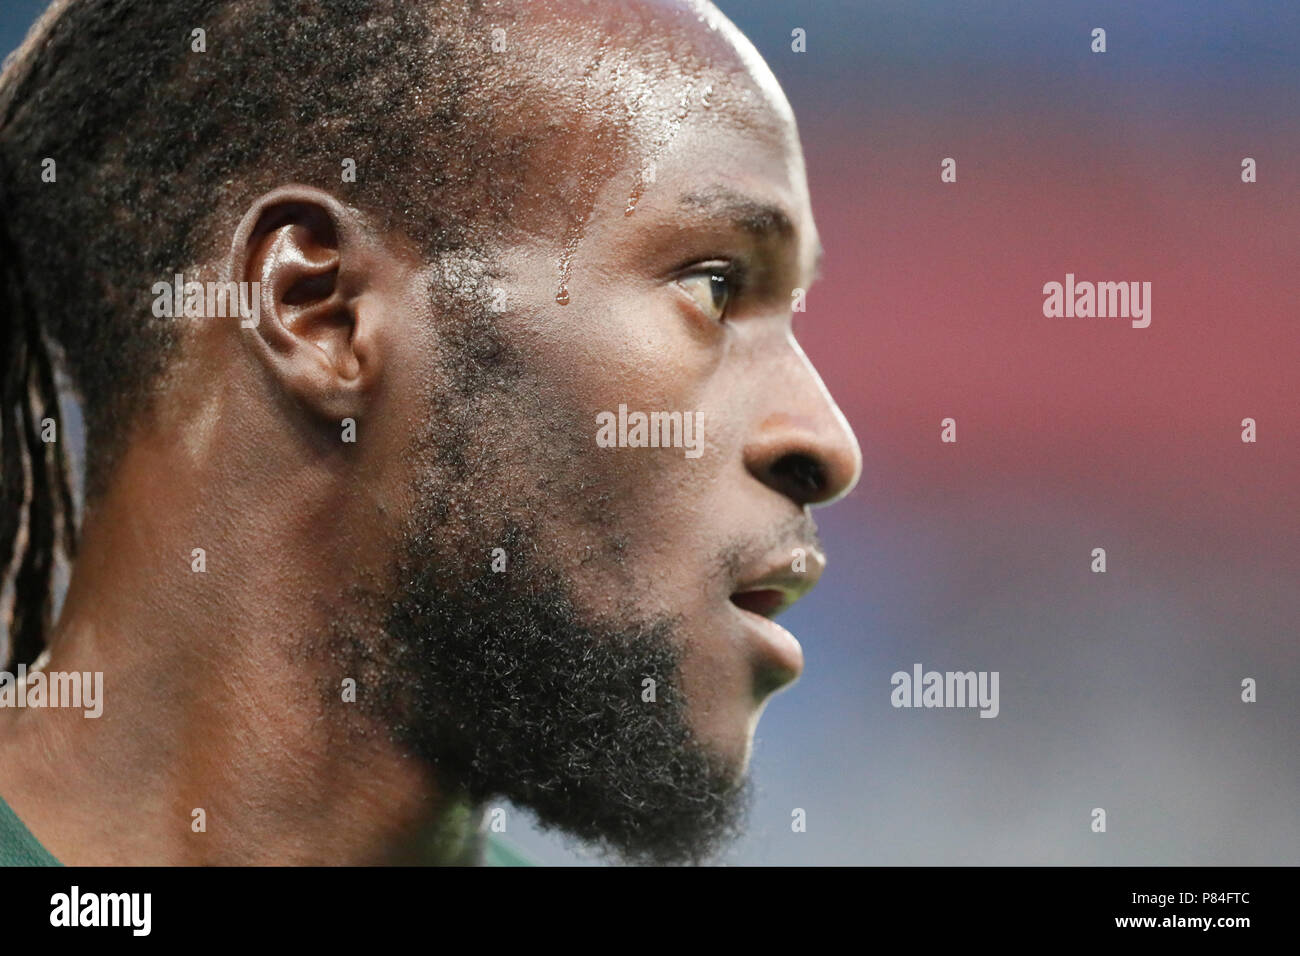 SAINT PETERSBURG, RUSSIA - JUNE 26: Victor Moses of Nigeria national team during the 2018 FIFA World Cup Russia group D match between Nigeria and Argentina at Saint Petersburg Stadium on June 26, 2018 in Saint Petersburg, Russia. (MB Media) Stock Photo